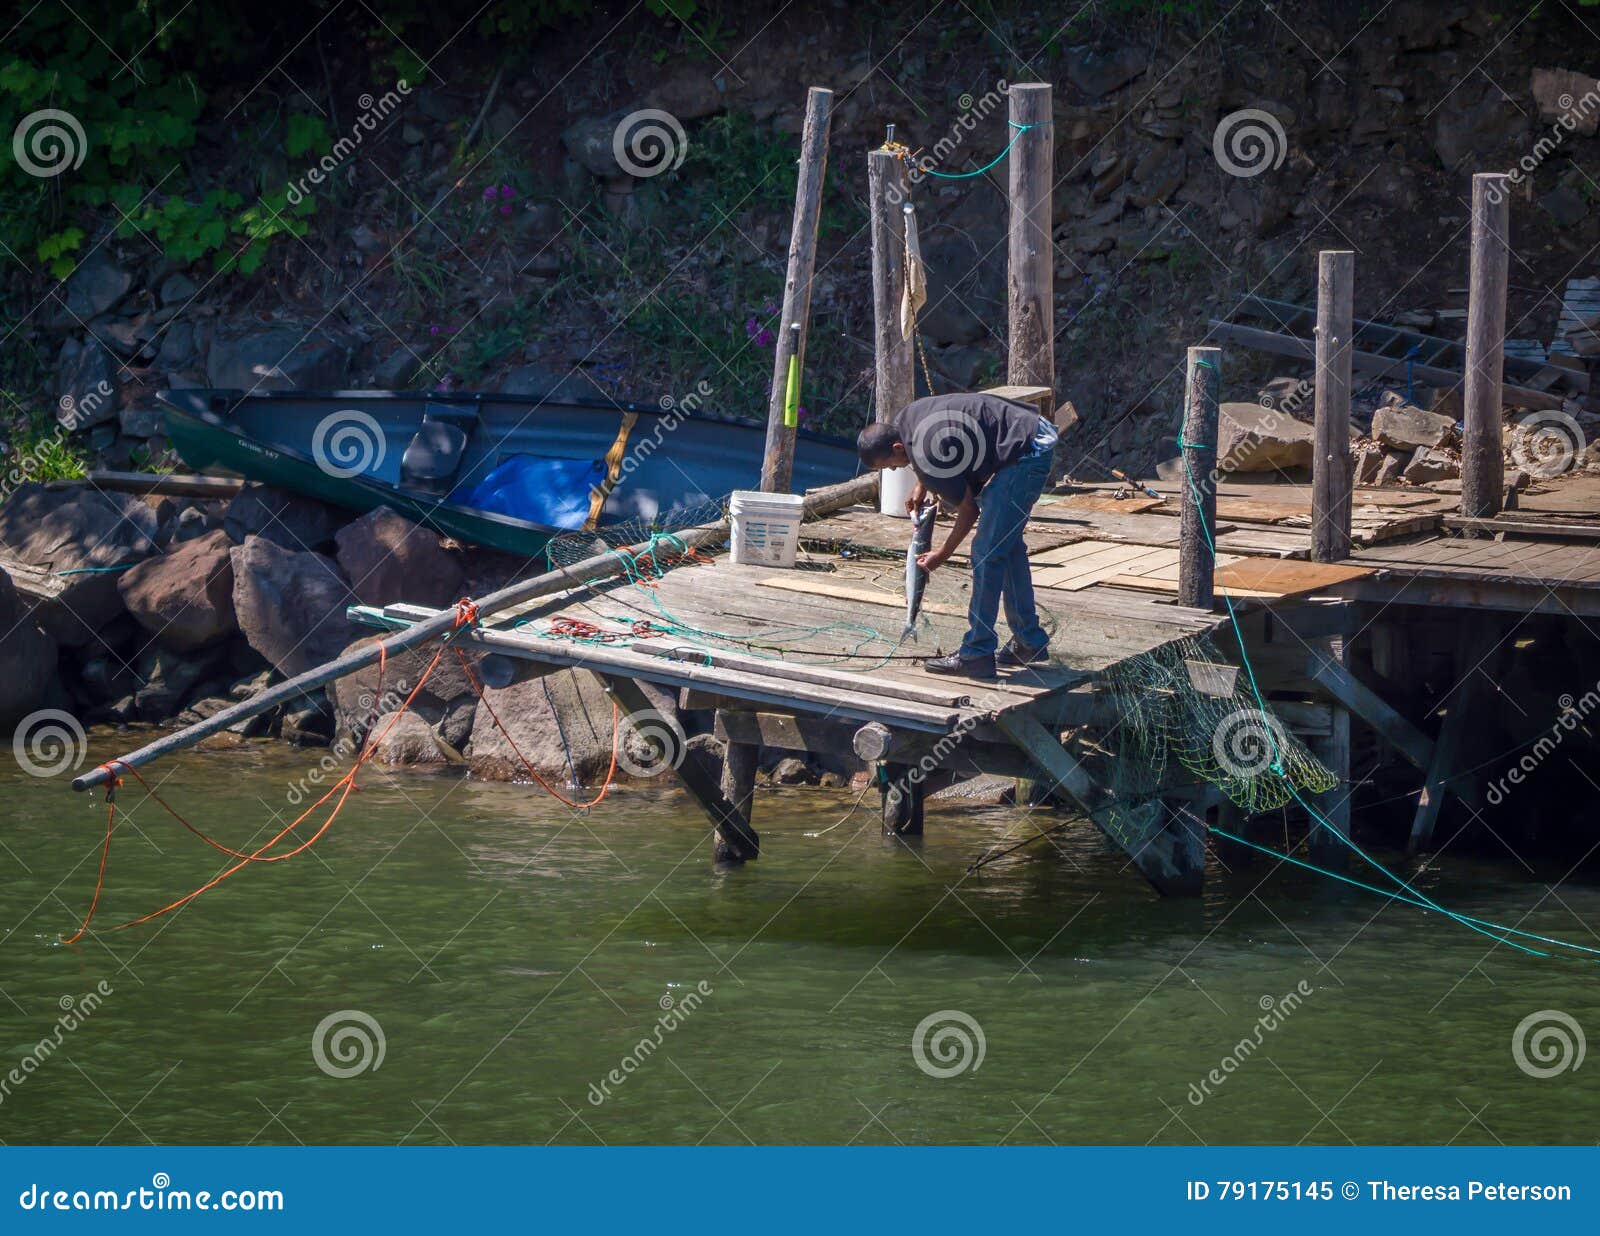 https://thumbs.dreamstime.com/z/dip-net-fishing-columbia-river-native-american-pulls-salmon-has-been-tradition-custom-many-local-tribes-79175145.jpg